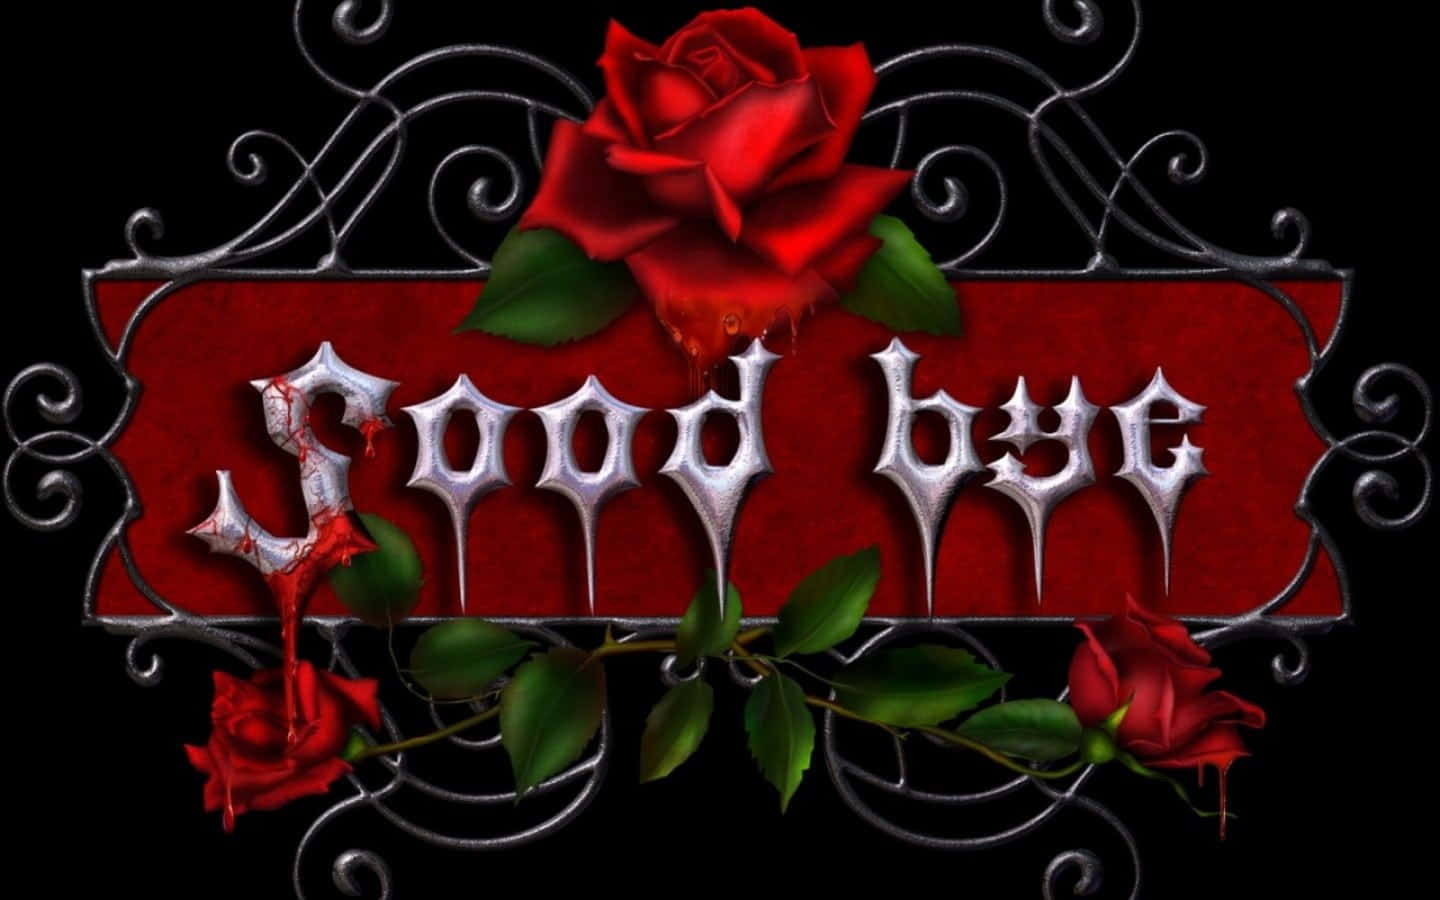 A Black And Red Good Bye Sign With Roses